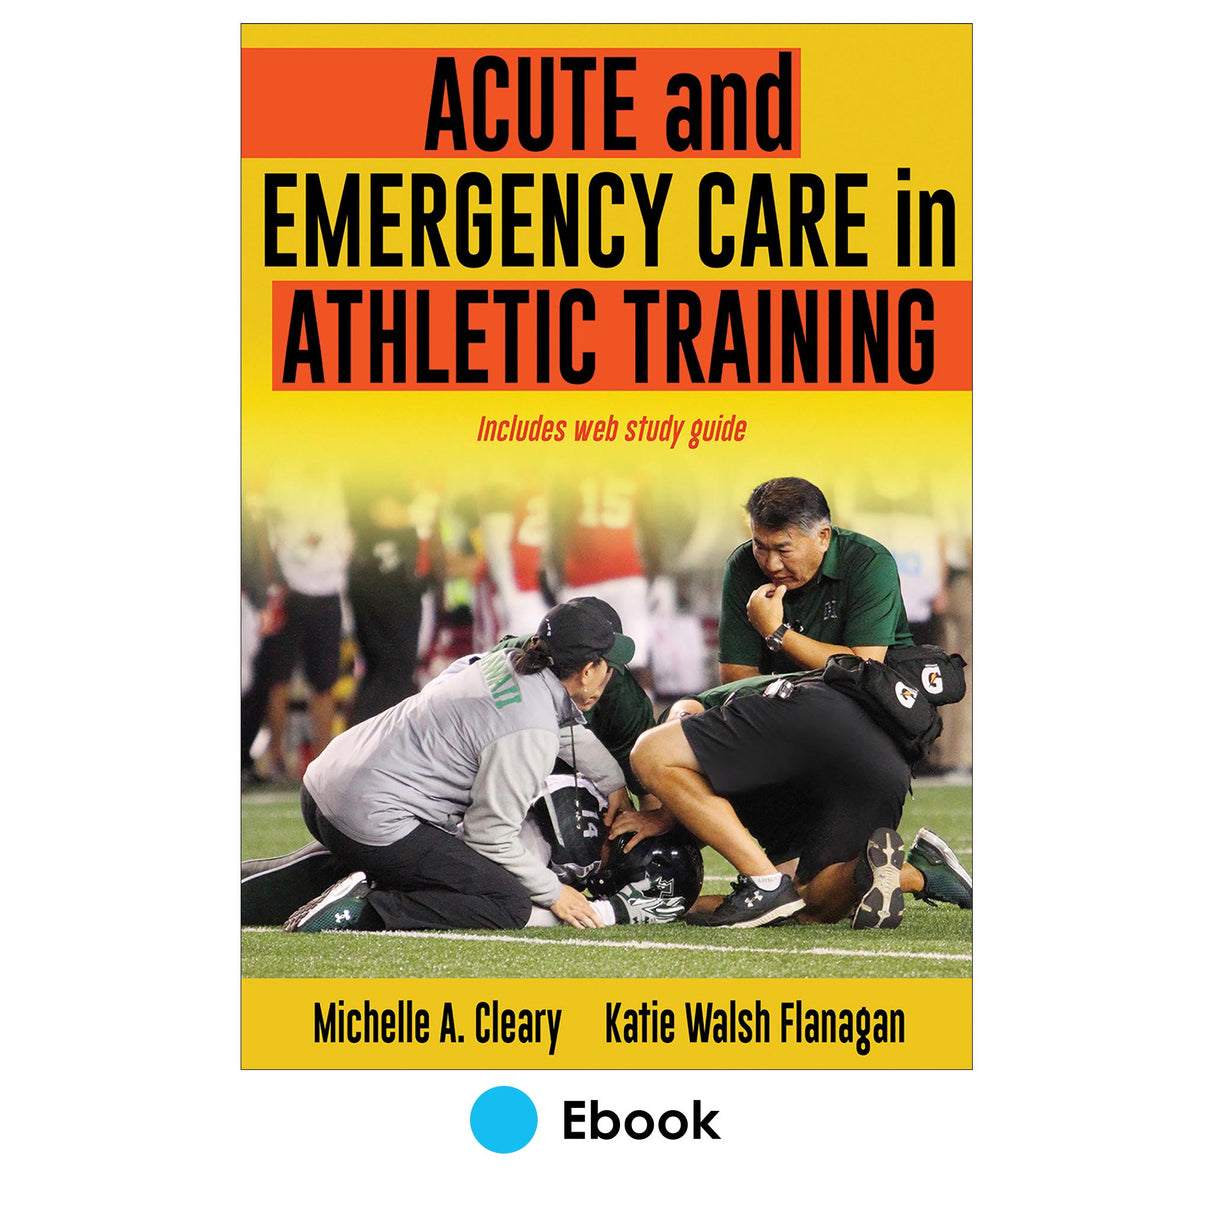 Acute and Emergency Care in Athletic Training epub With Web Study Guide